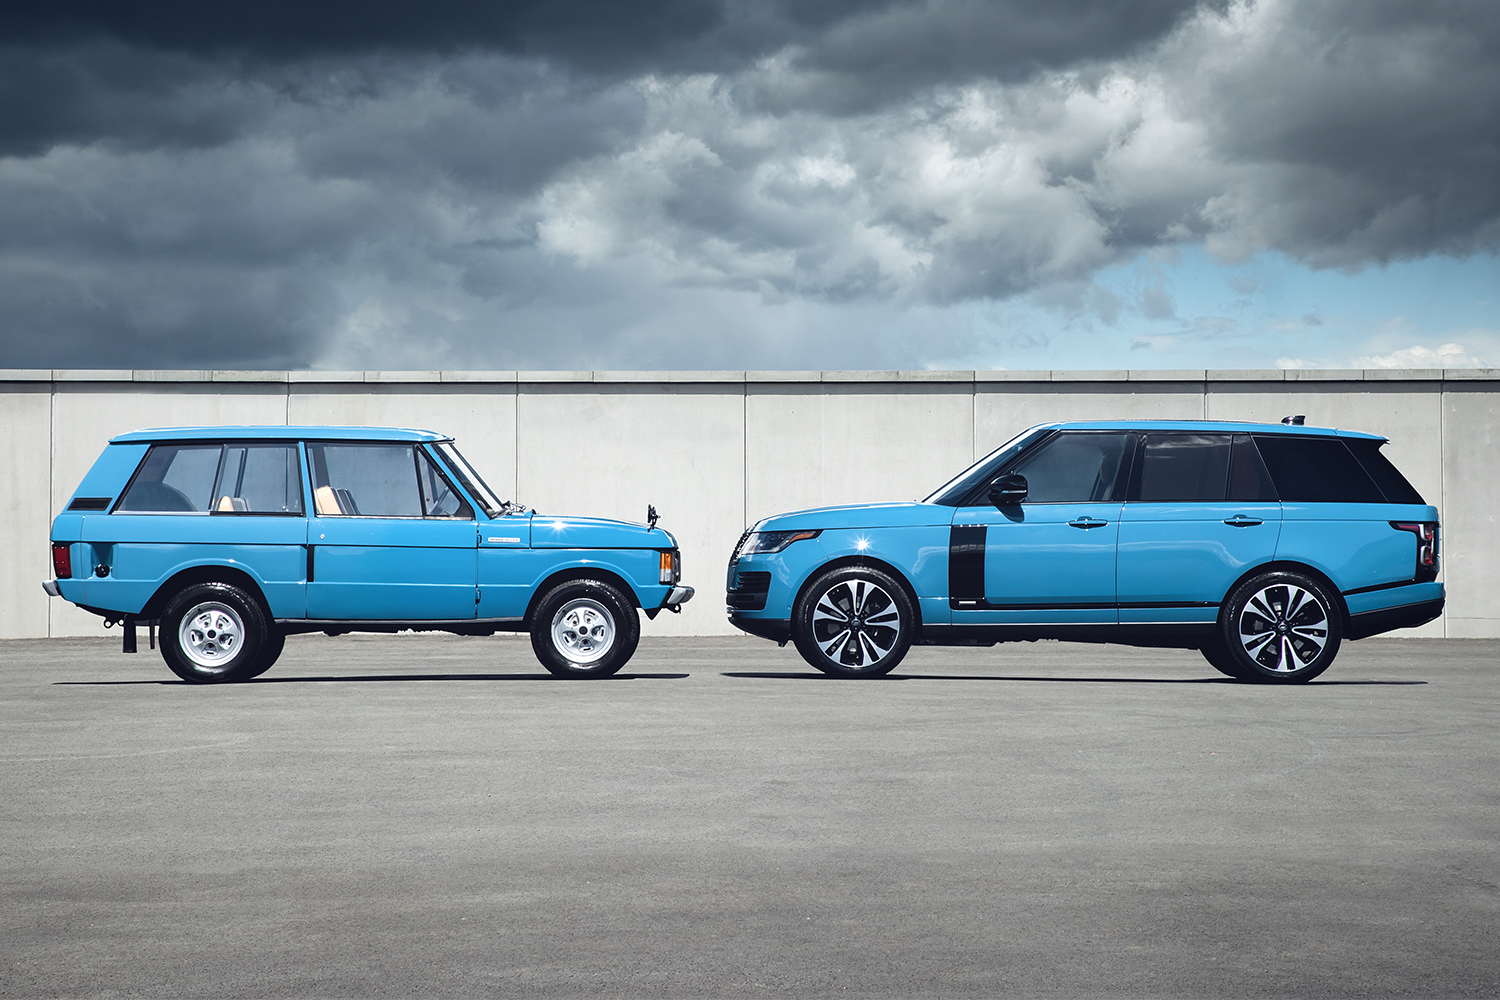 A 1970 Range Rover and limited-edition Range Rover Fifty in Tuscan Blue